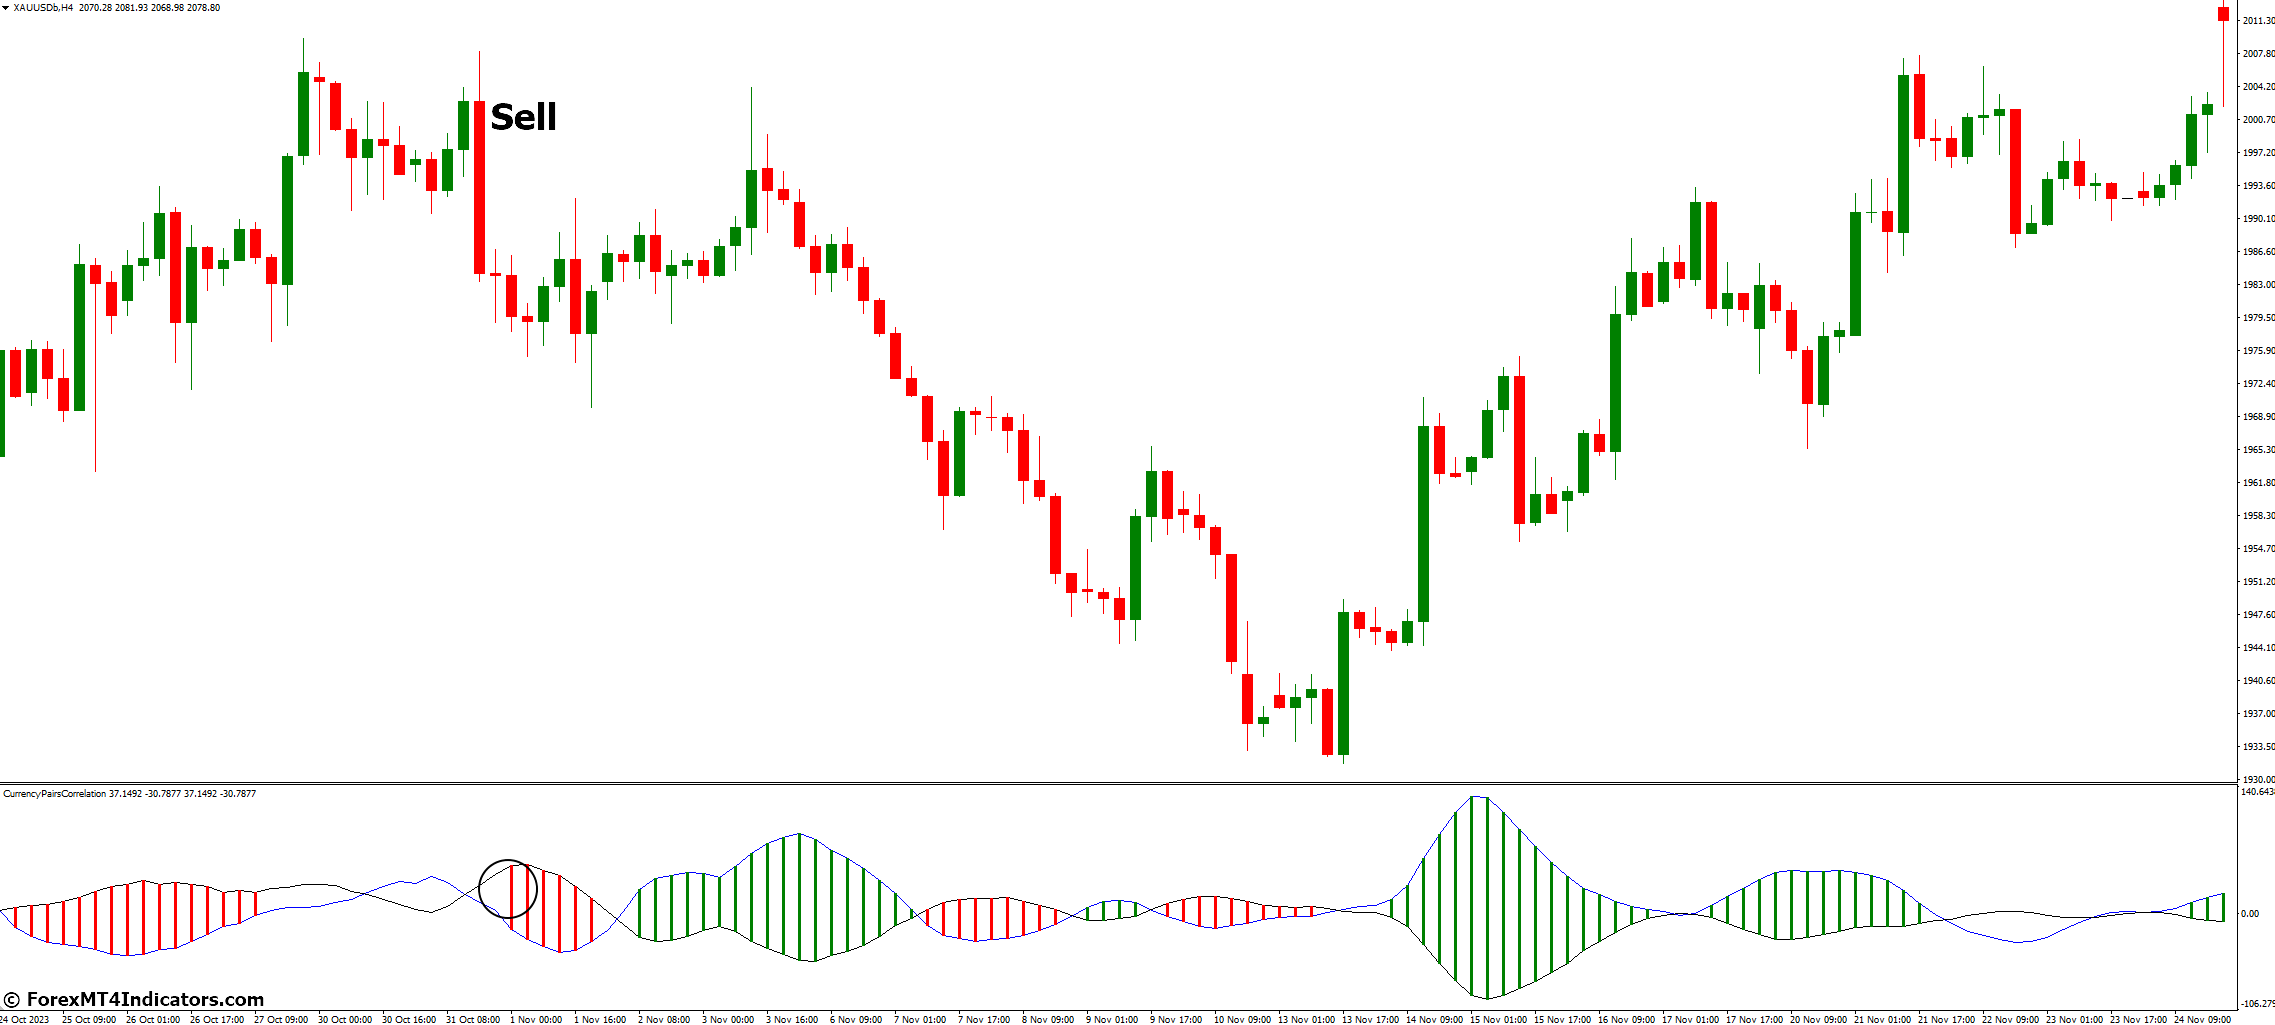 How to Trade with Currency Correlation Indicator - Sell Entry